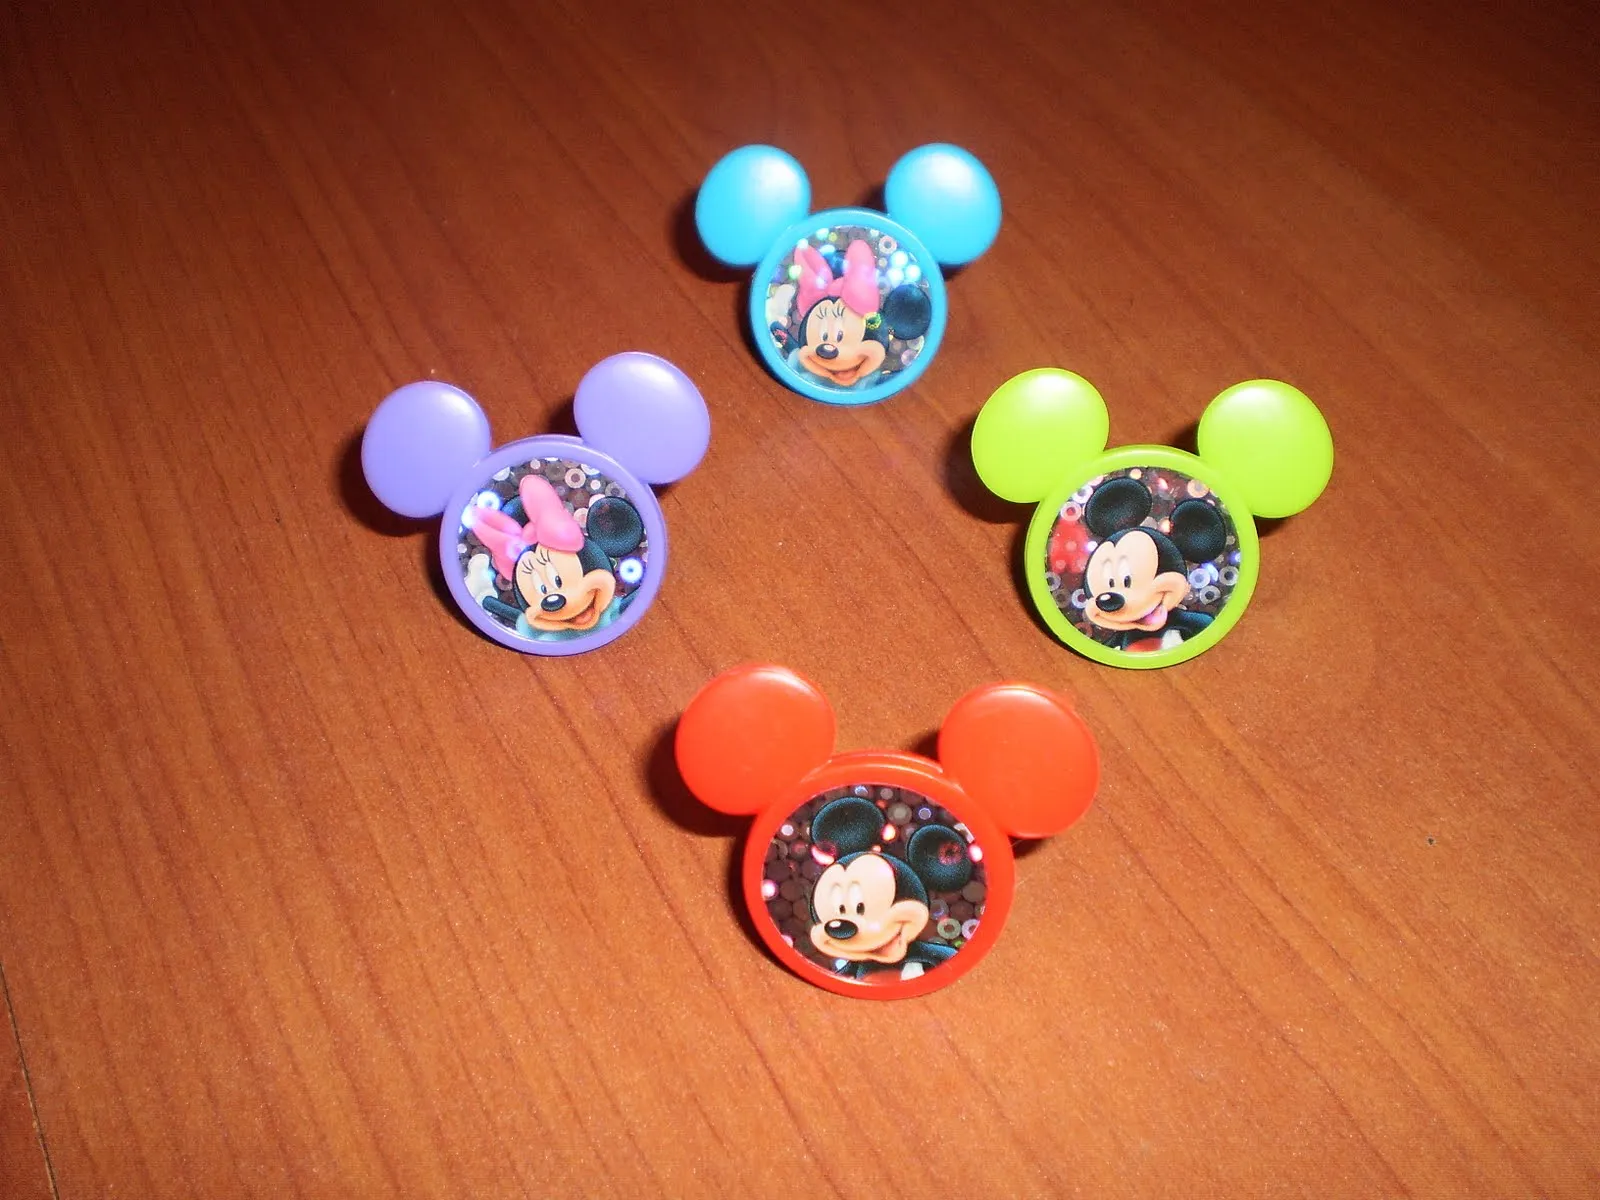 Pin Mickey Mouse Souvenirs Cumpleanos on Pinterest